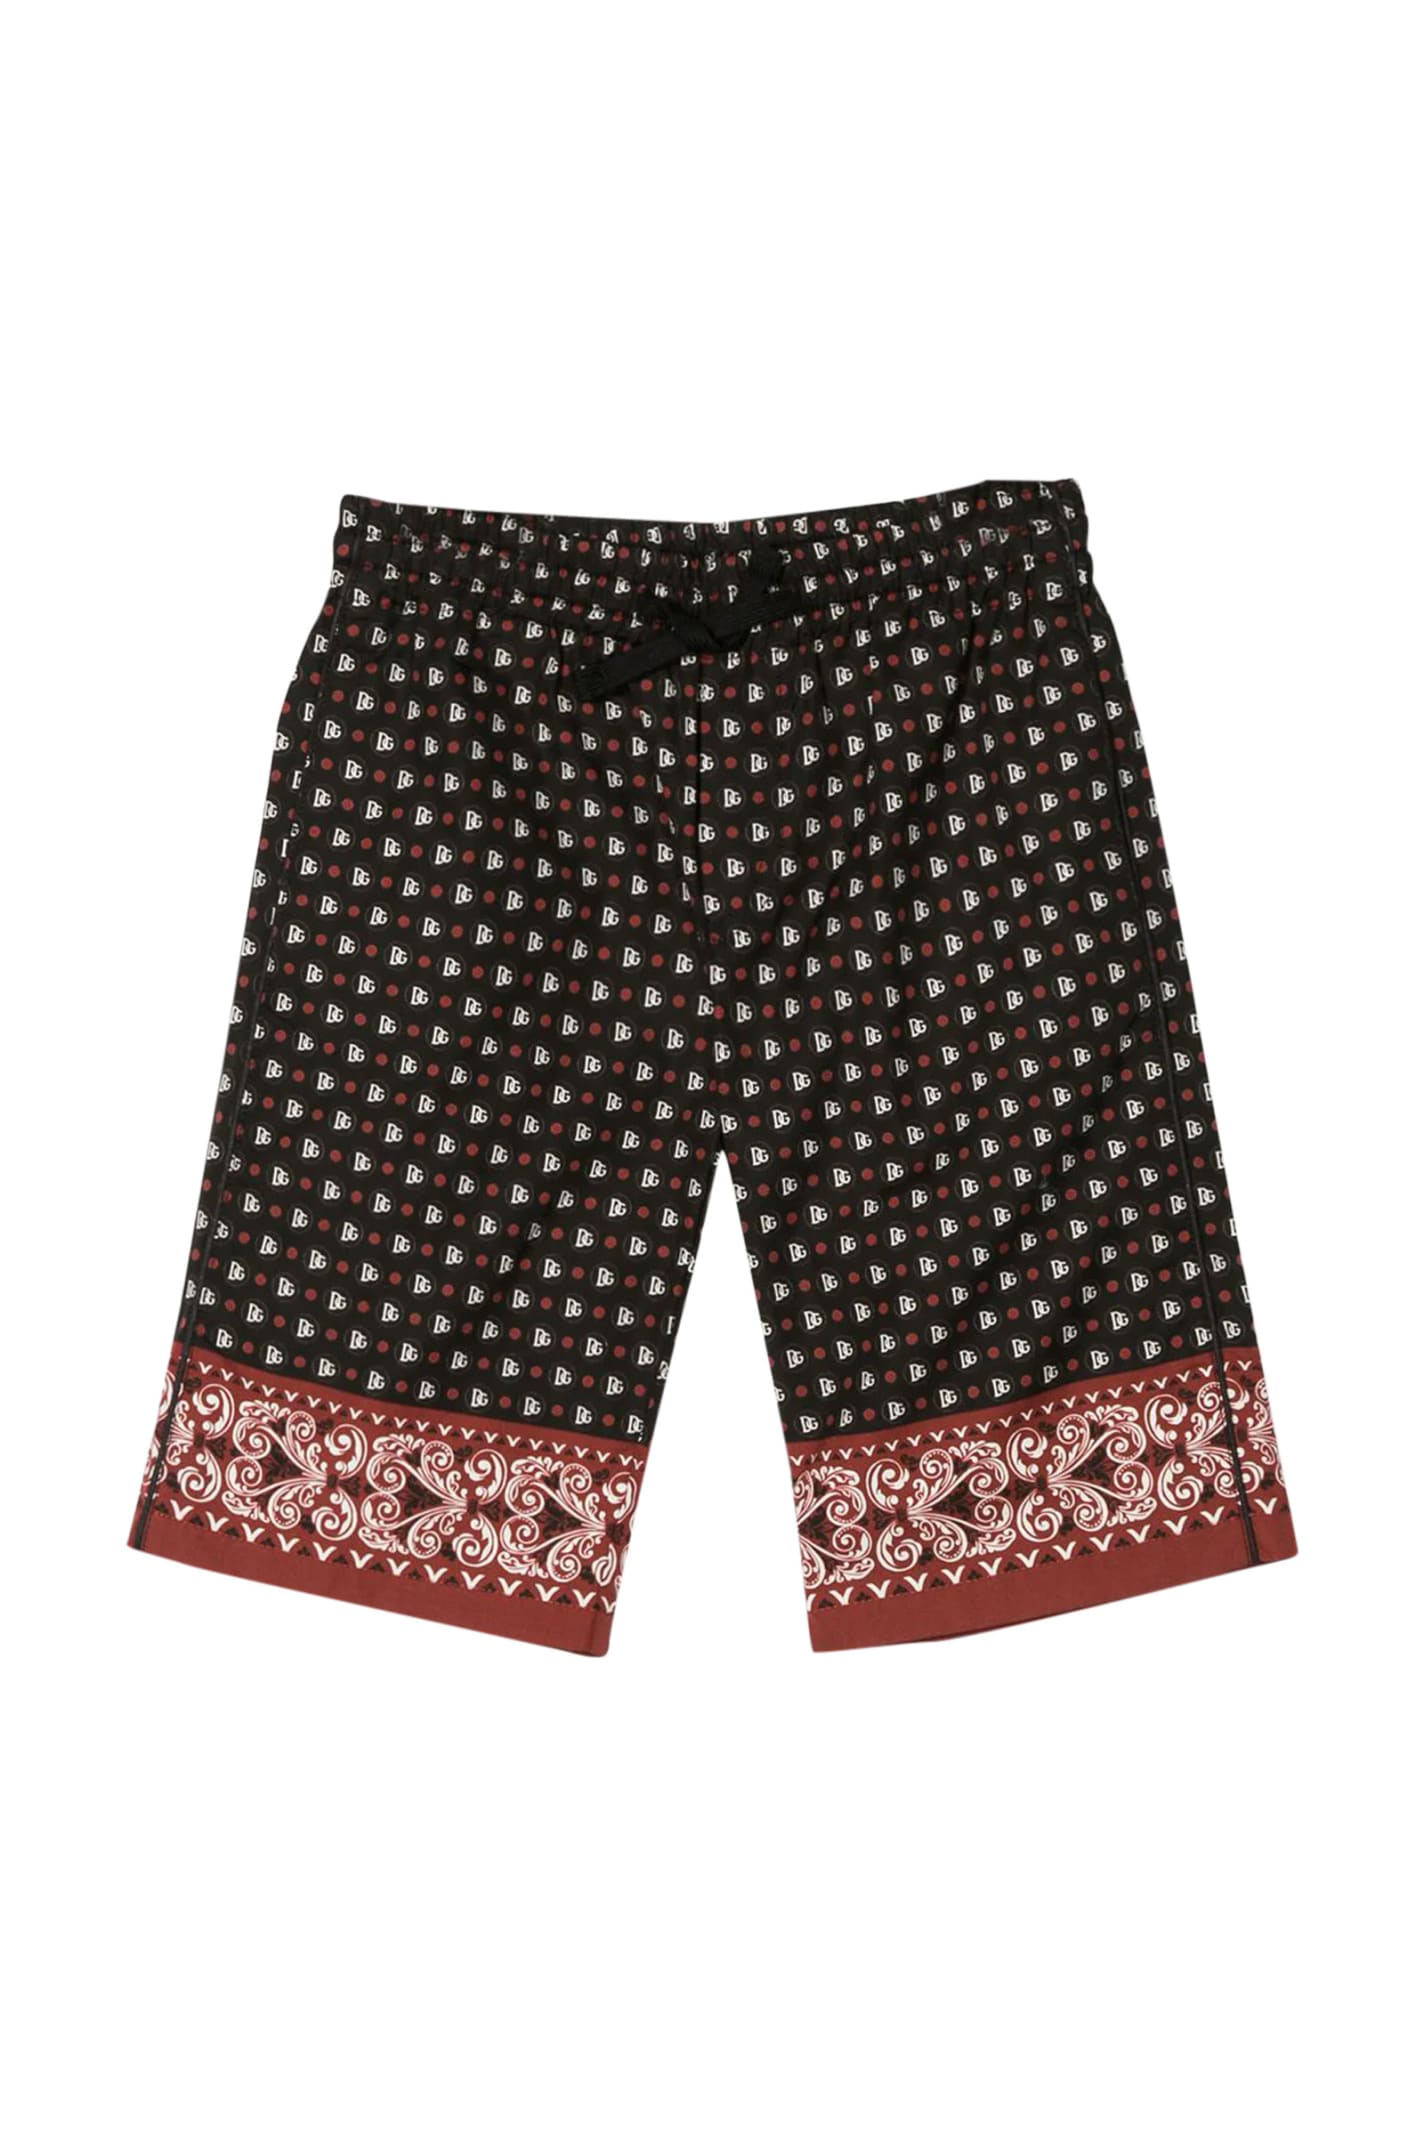 Dolce & Gabbana Kids' Coulisse Shorts In Rosso